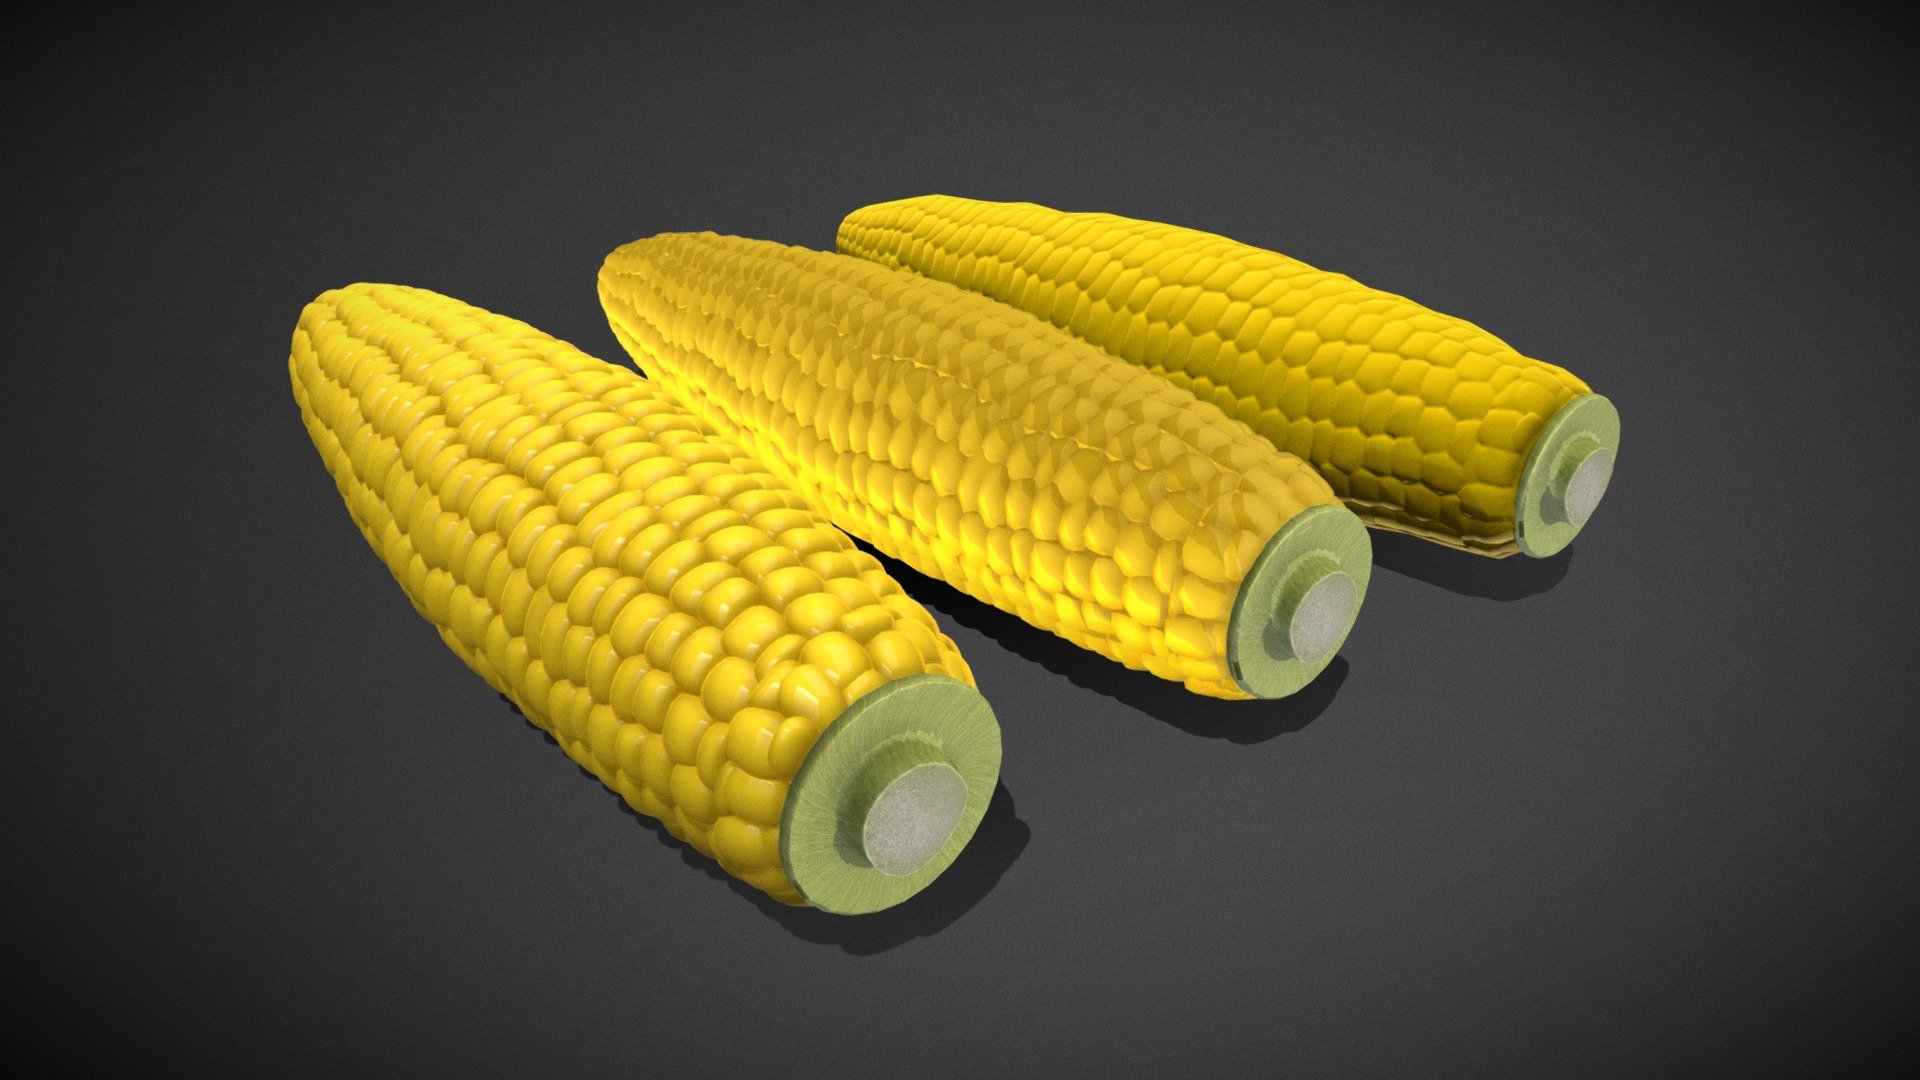 Corn Model  Low Res,Mid, and Hi res version 
Objects are grouped and named according to their real purpose, allowing the model to be rigged and animated easily. -Clean and optimized topology is used for maximum polygon efficiency. -Model is fully sub-dividable to allow Turbosmooth Iterations to increase mesh smoothness if needed. -All objects have fully unwrapped UVs 3d model